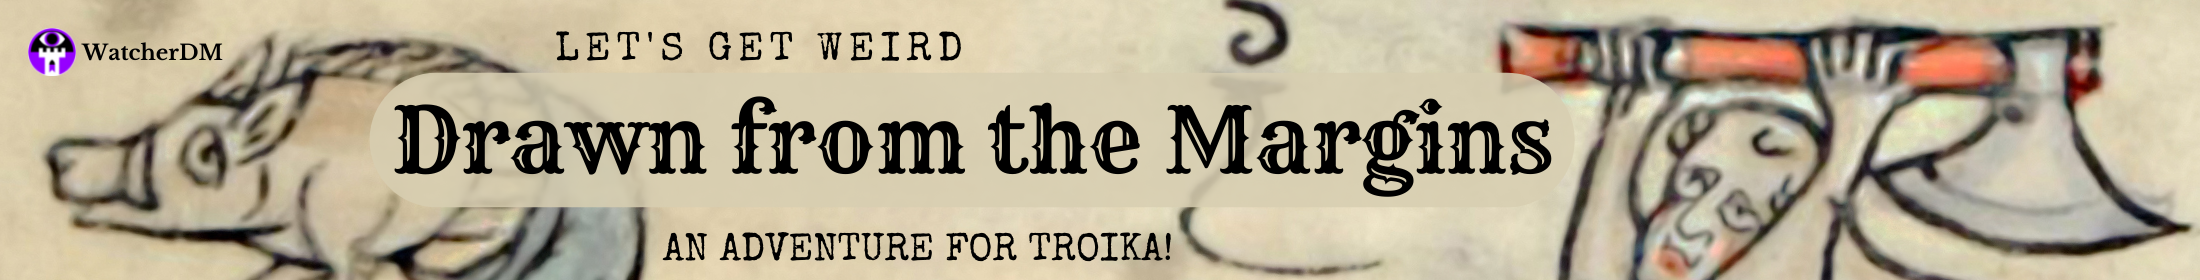 Drawn from the Margins: Troika! Compatible Adventure